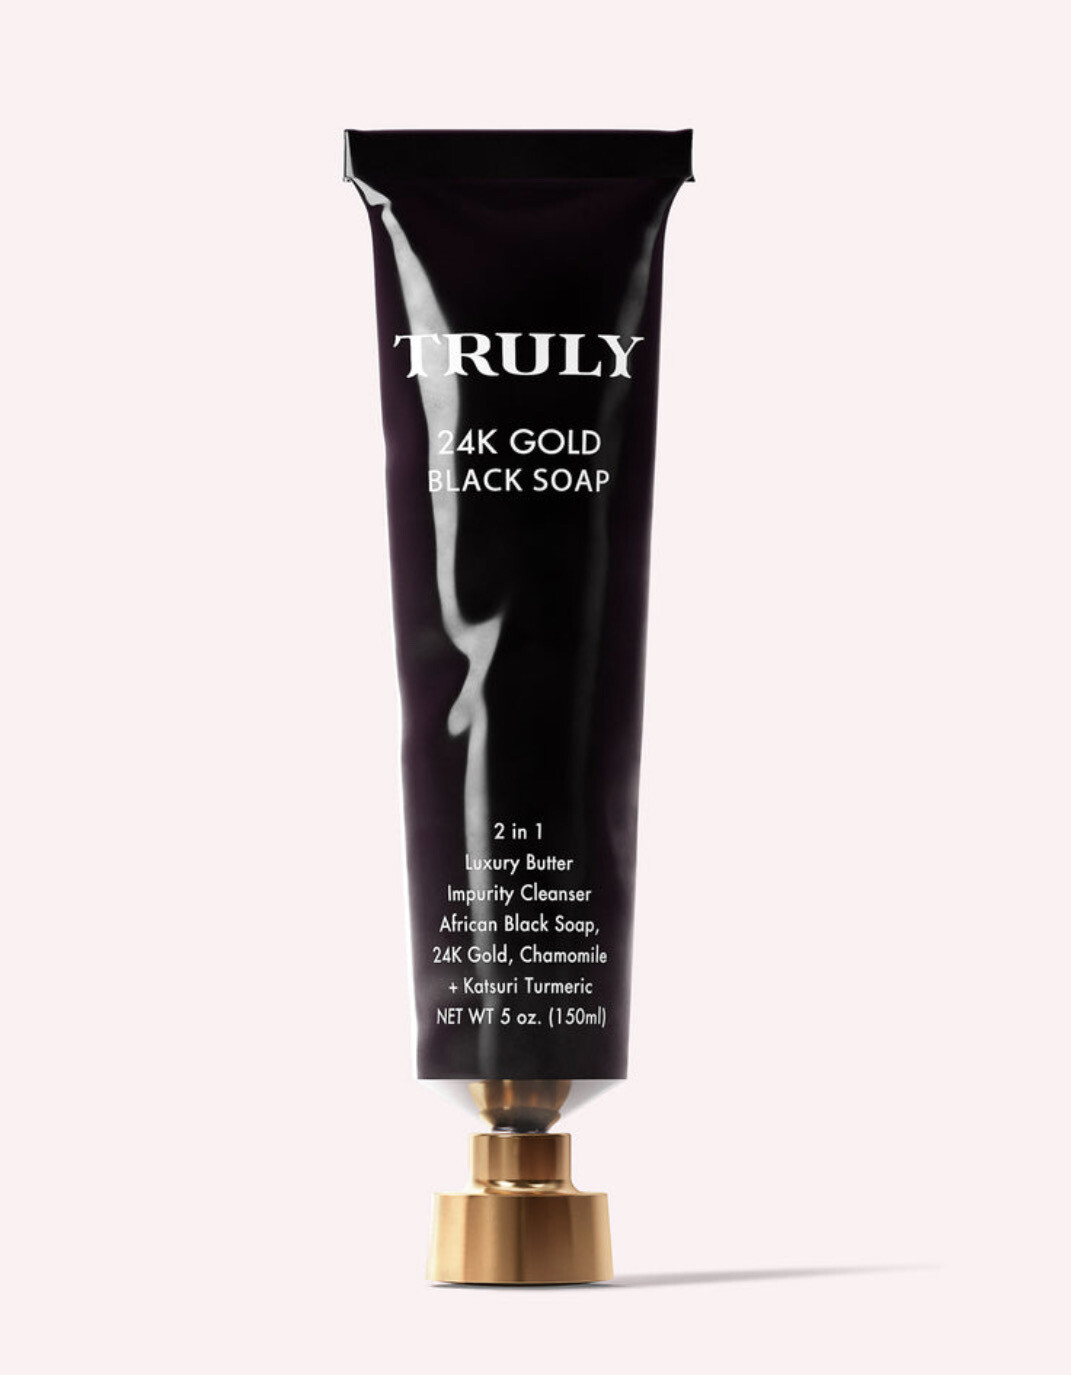 TRULY - 24k Gold Black Soap Impurity Cleanser